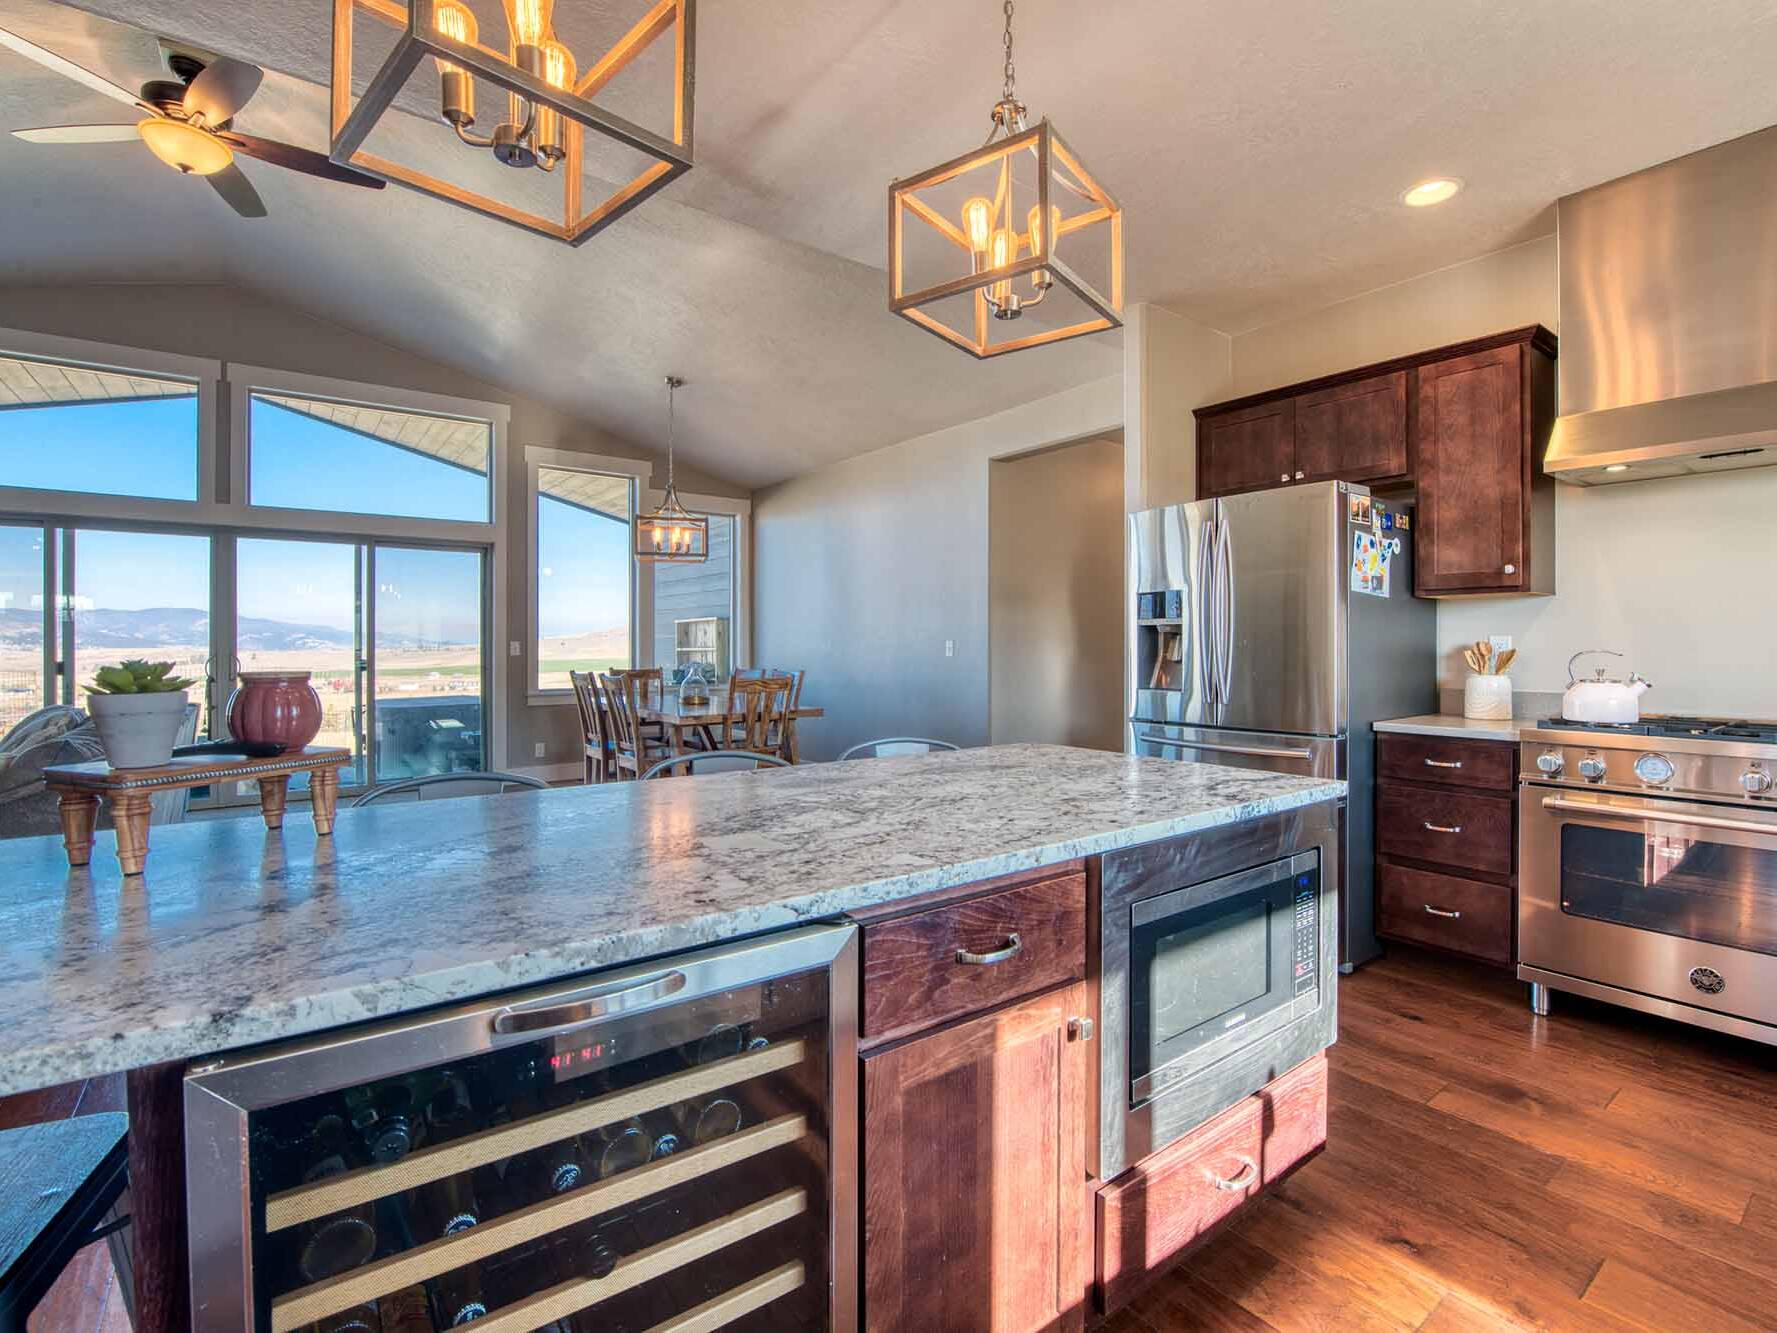 Kitchen with island, granite countertops and wood floors in The Copper Creek model home - Built by Big Sky Builder in Florence, MT